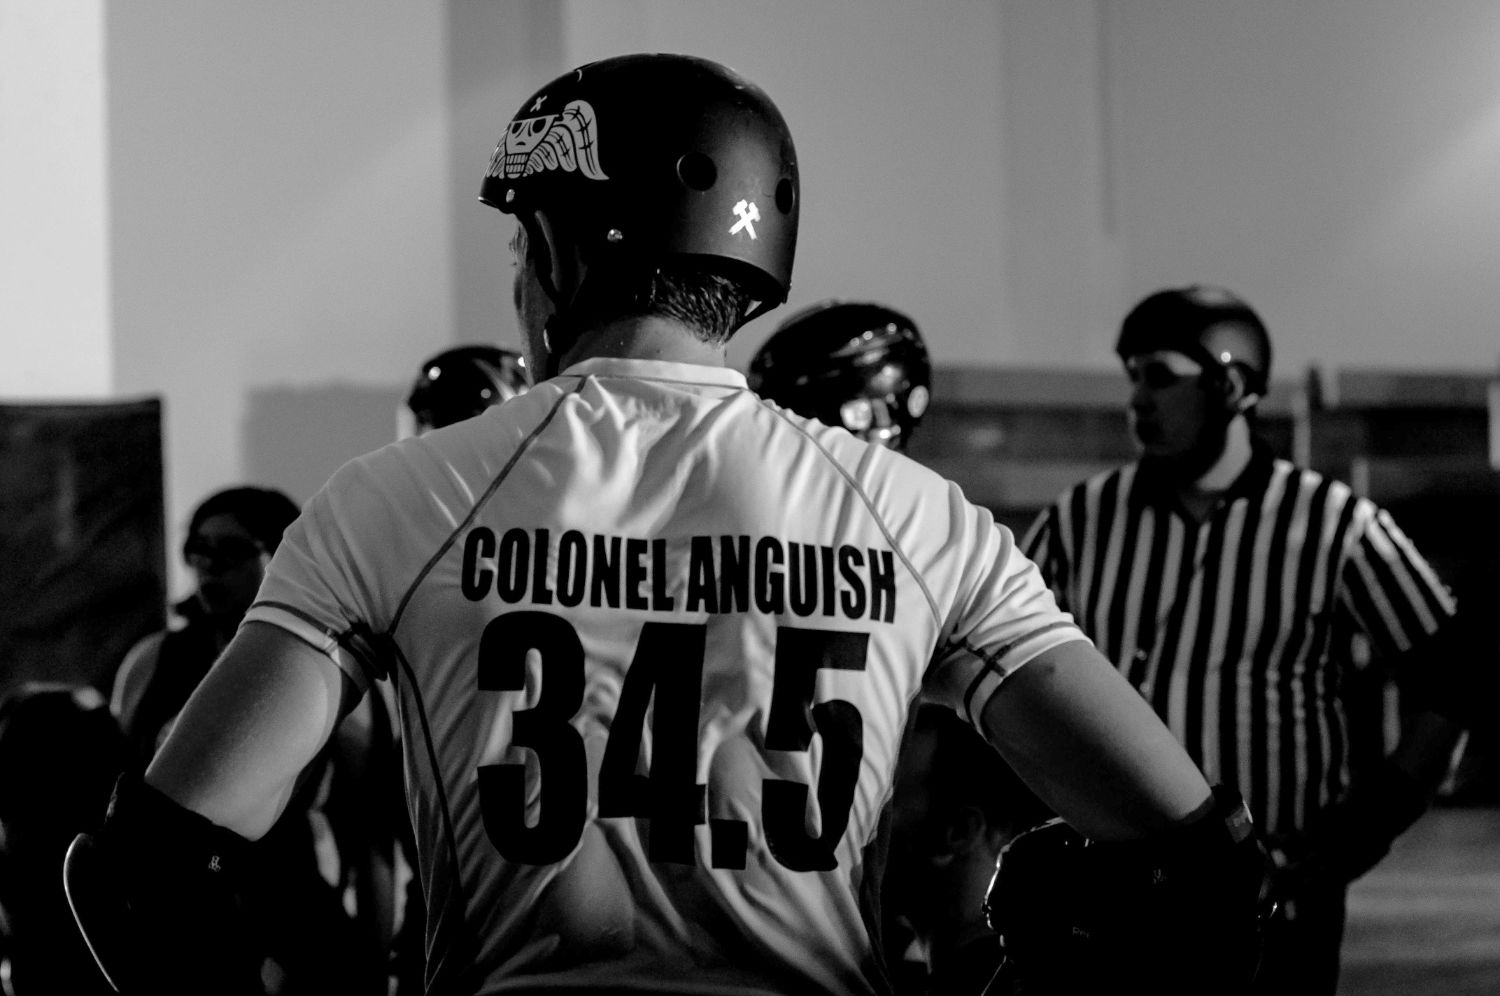 Martin seen from behind in his roller derby gear